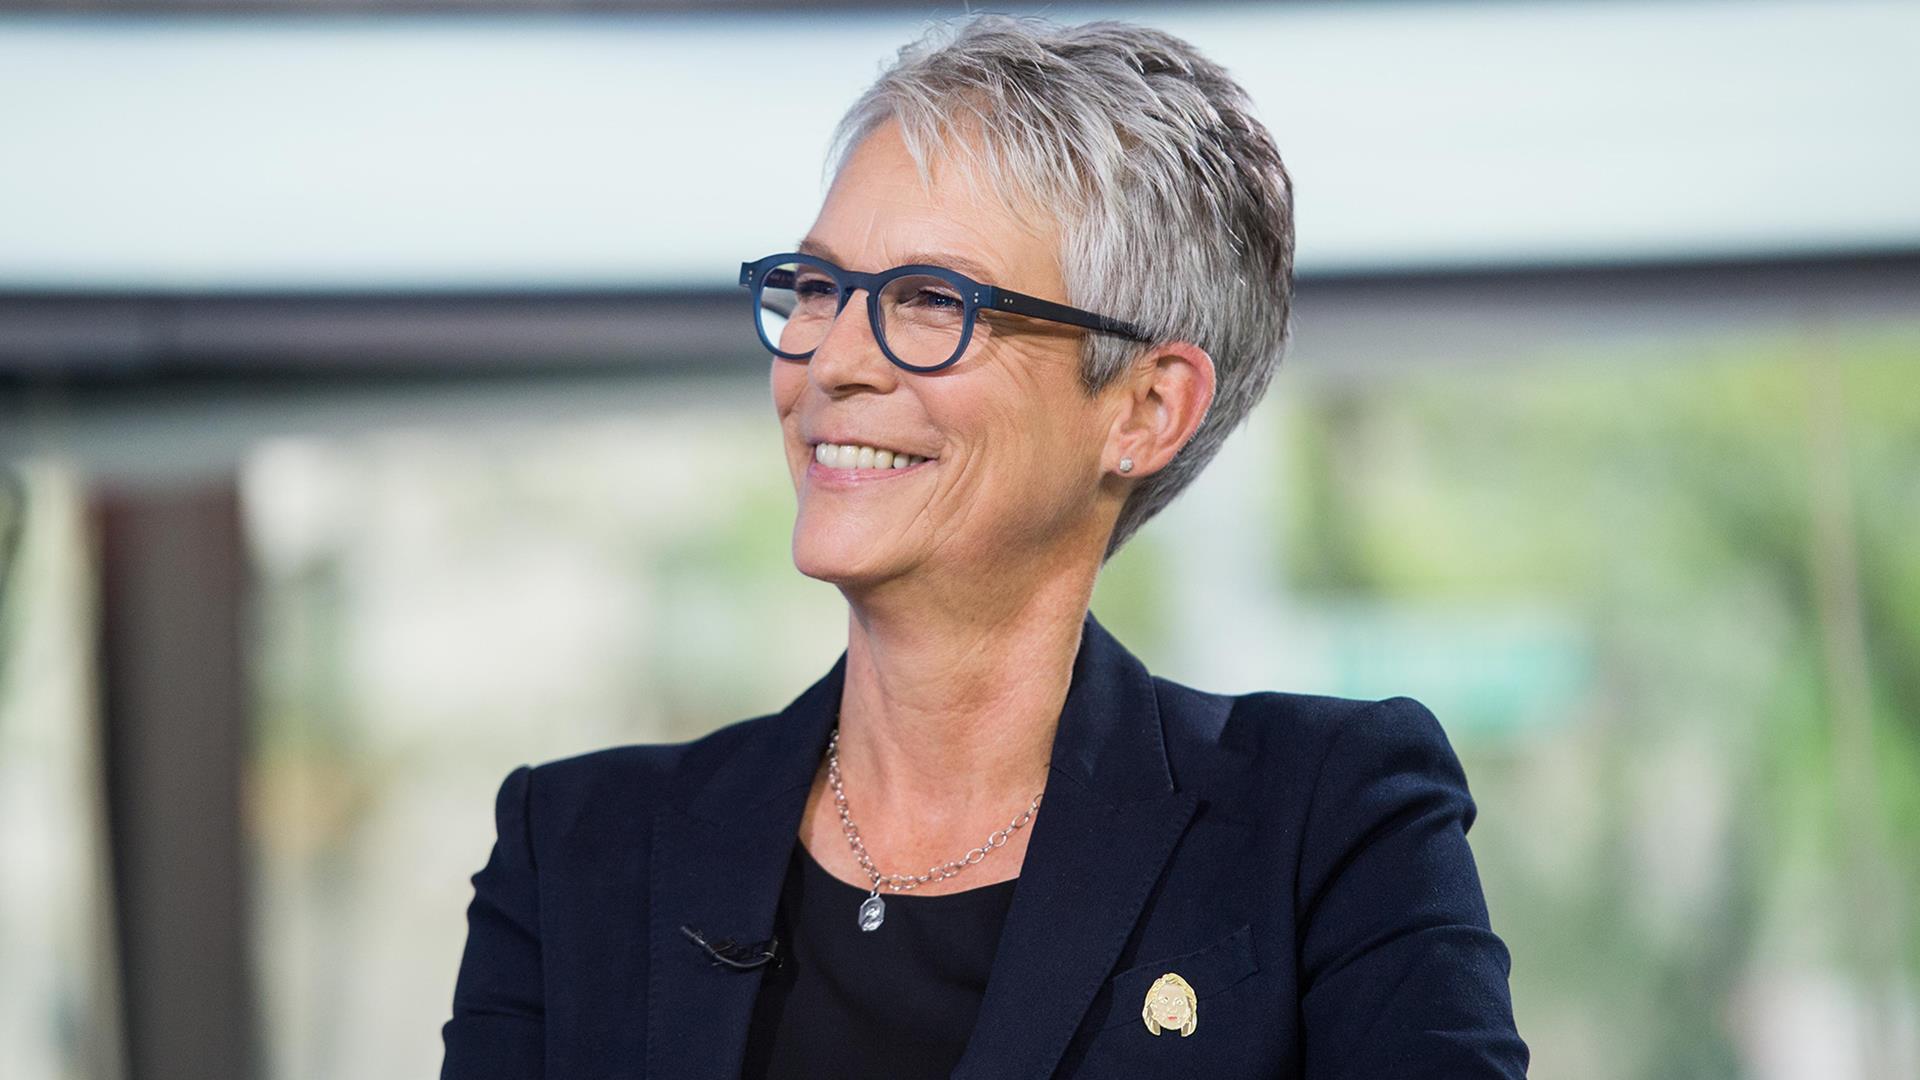 Jamie Lee Curtis on 'Scream Queens' great writing and her immigration book